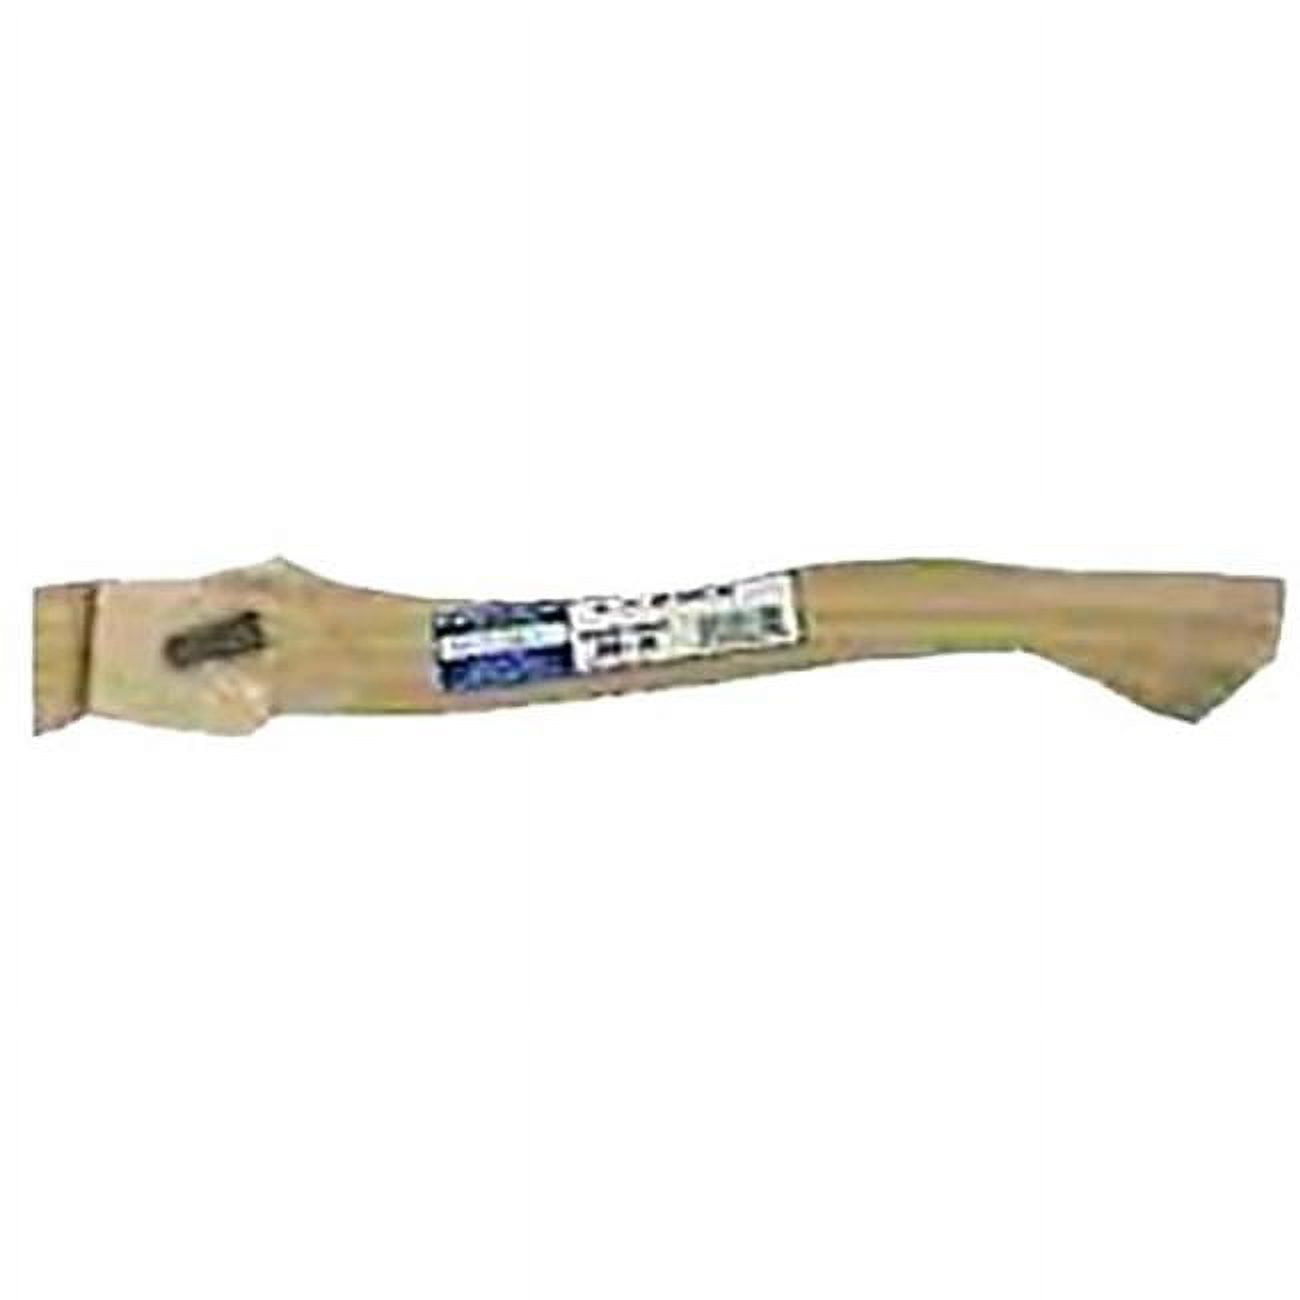 65142 14 In. Boy Scout Axe Handle